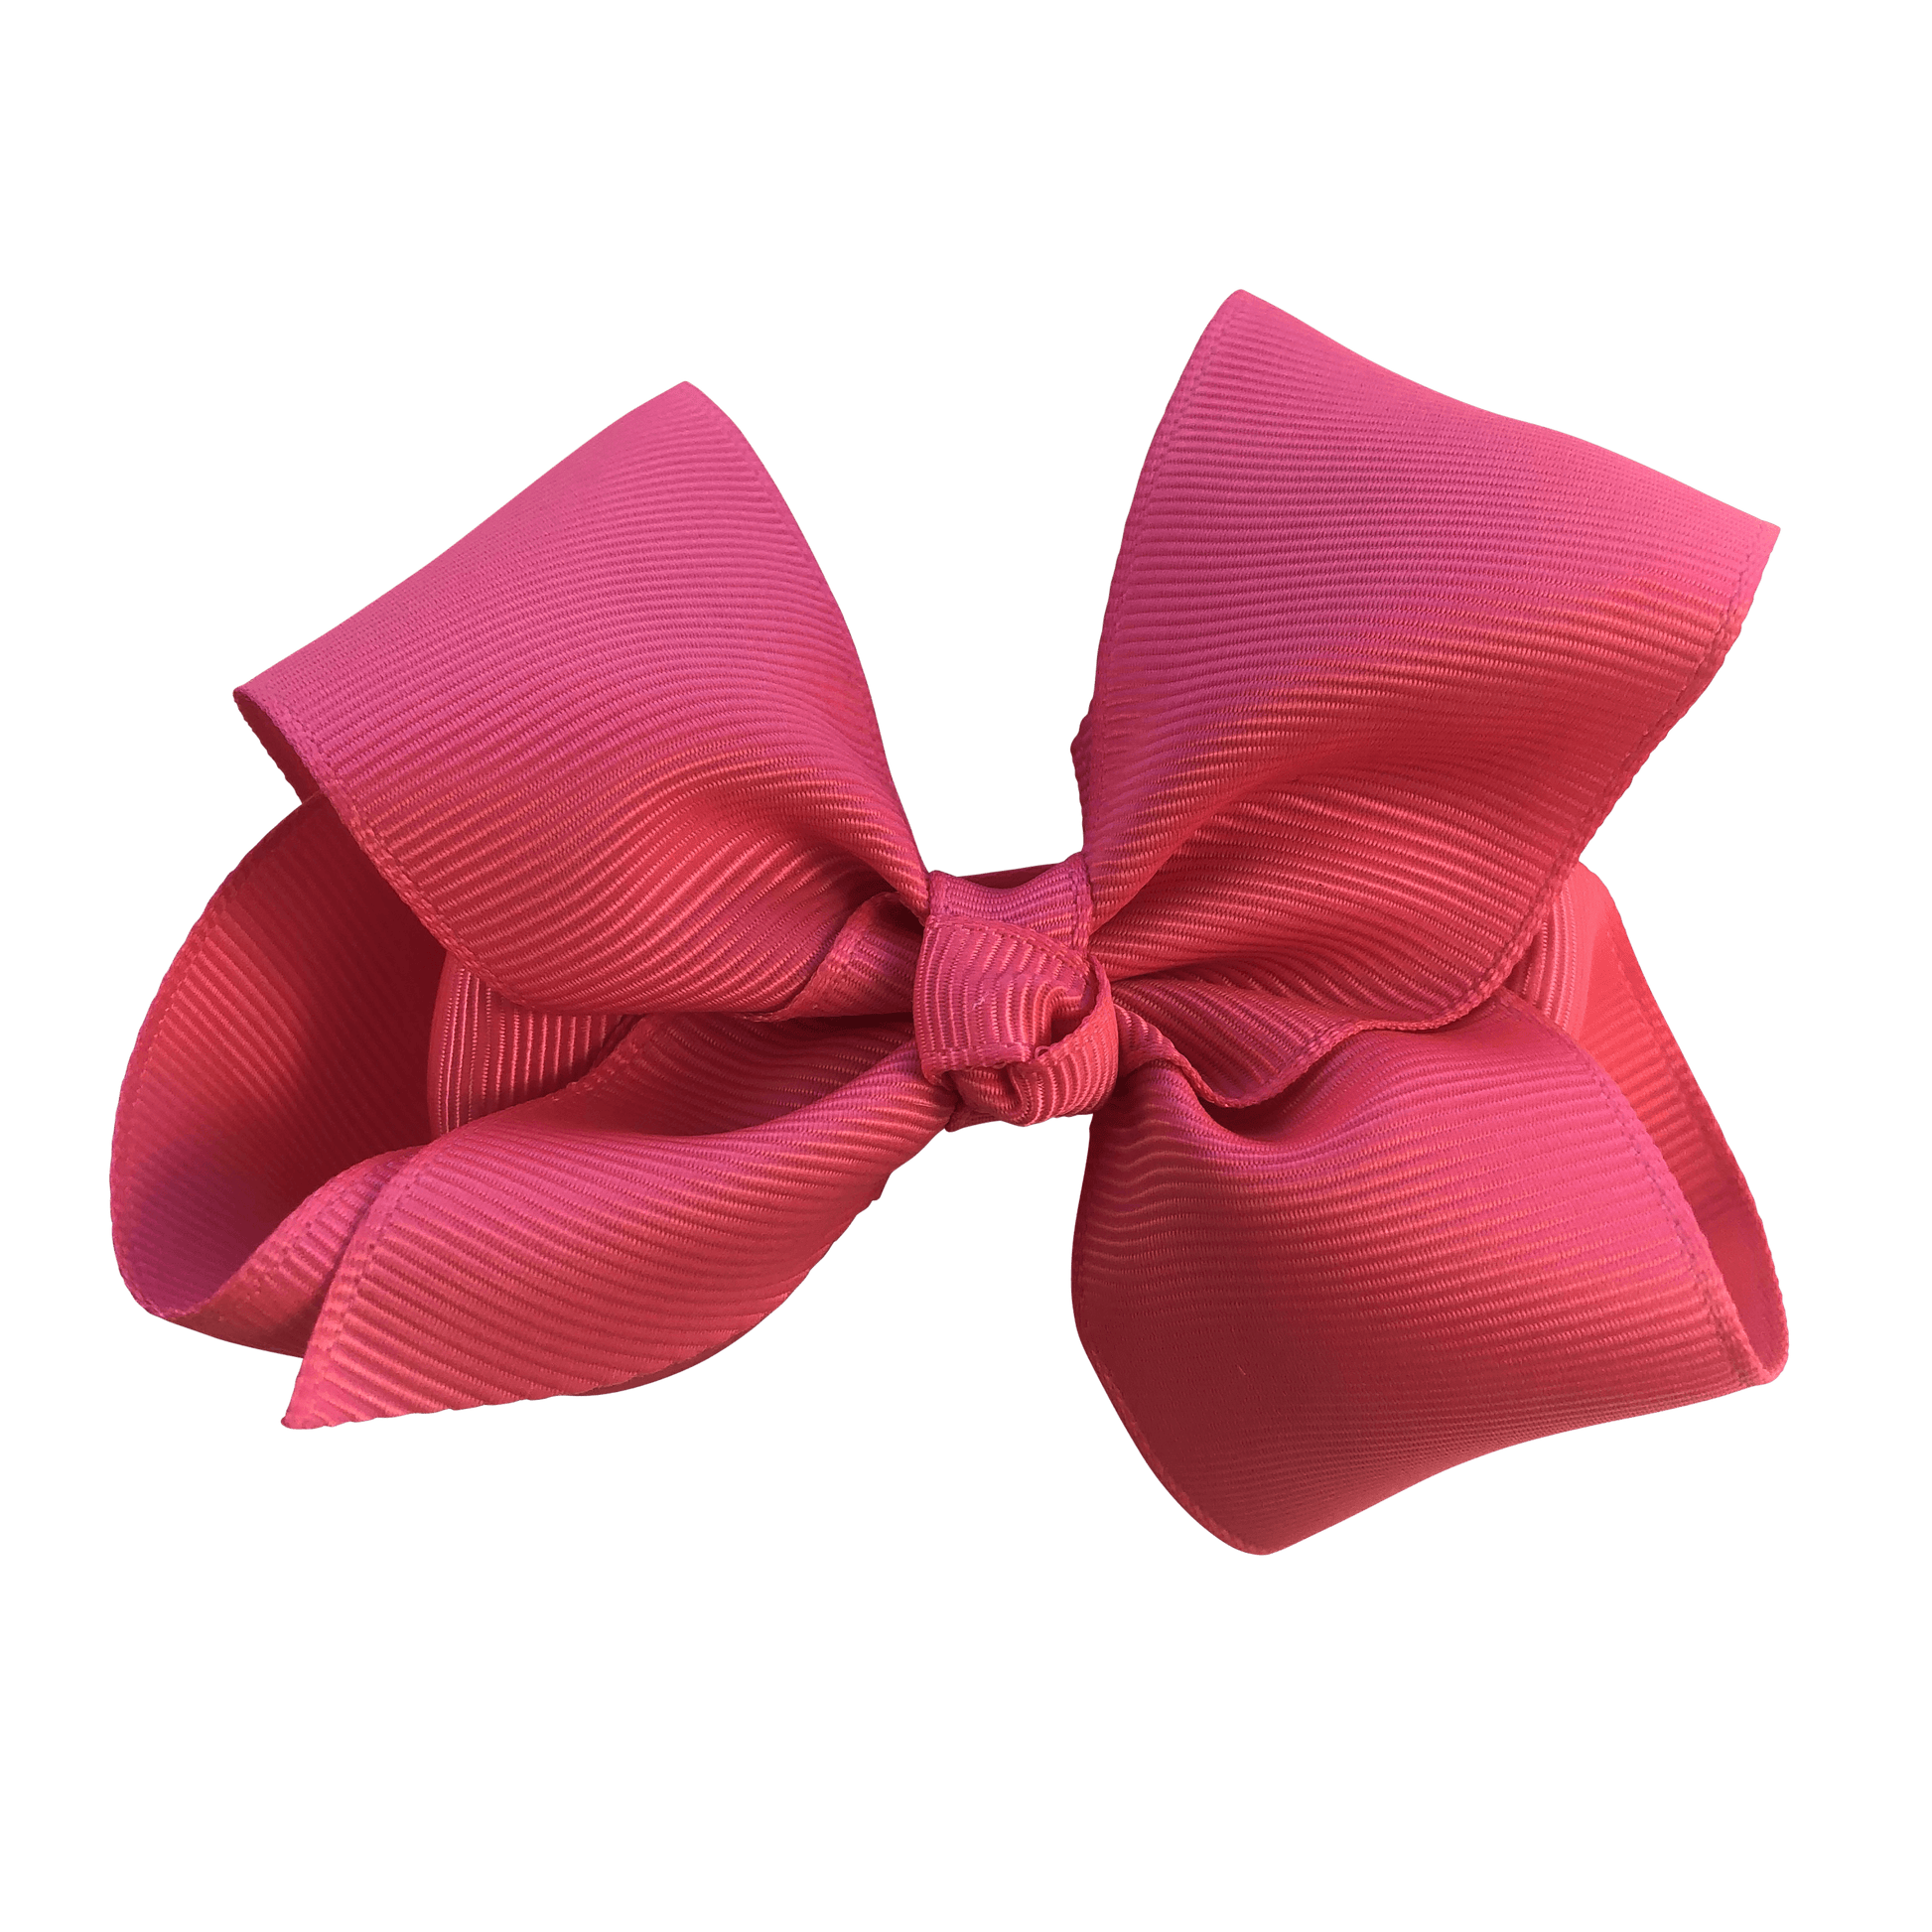 Fluoro Pink Hair Accessories - Assorted Hair Accessories - School Uniform Hair Accessories - Ponytails and Fairytales